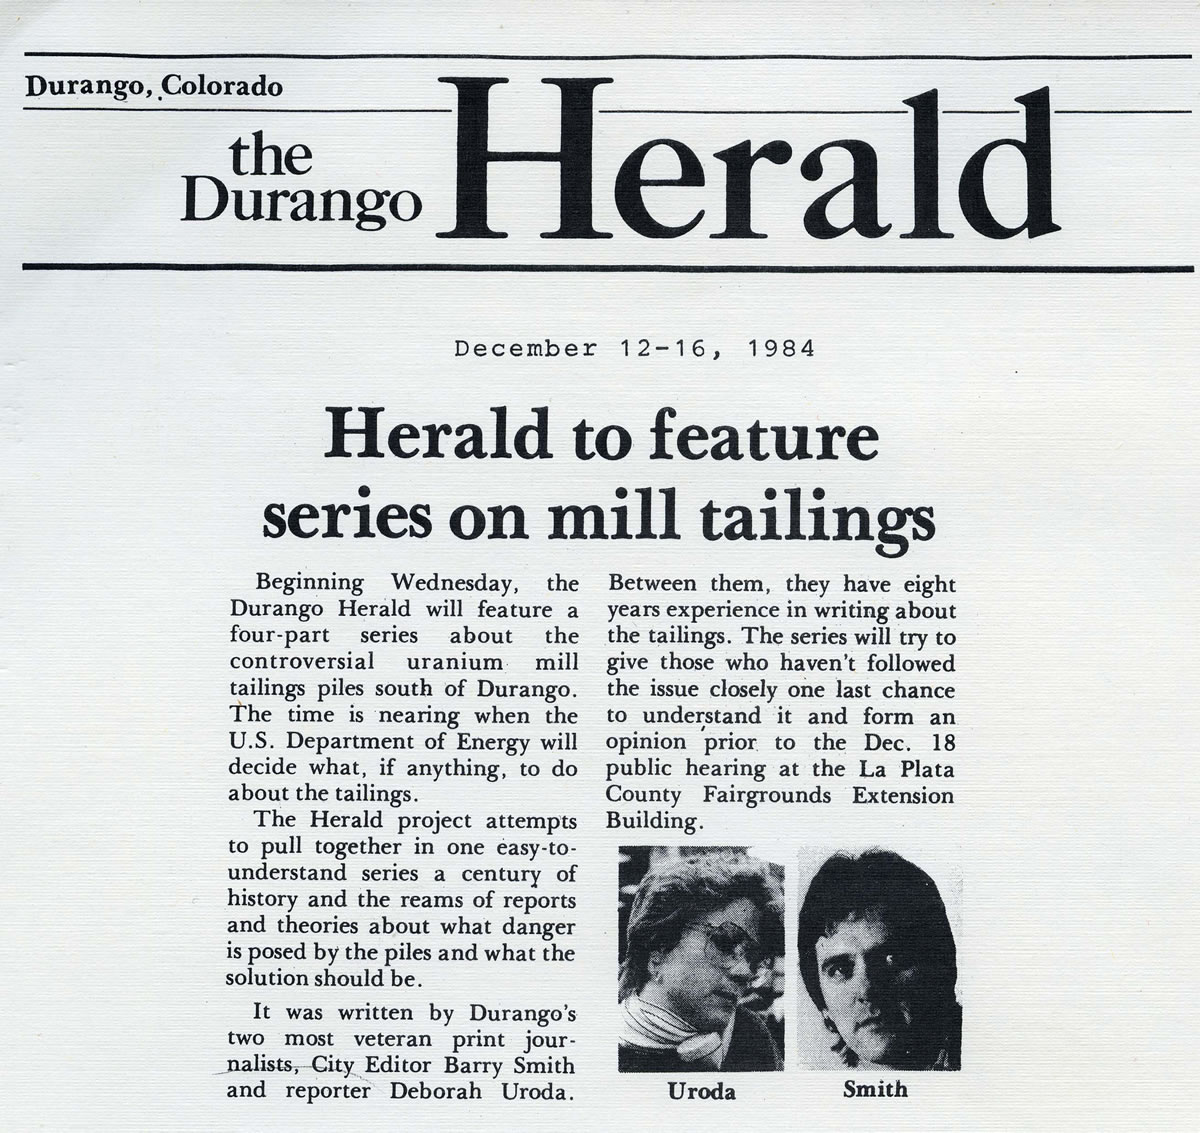 Herald to feature series on mill tailings